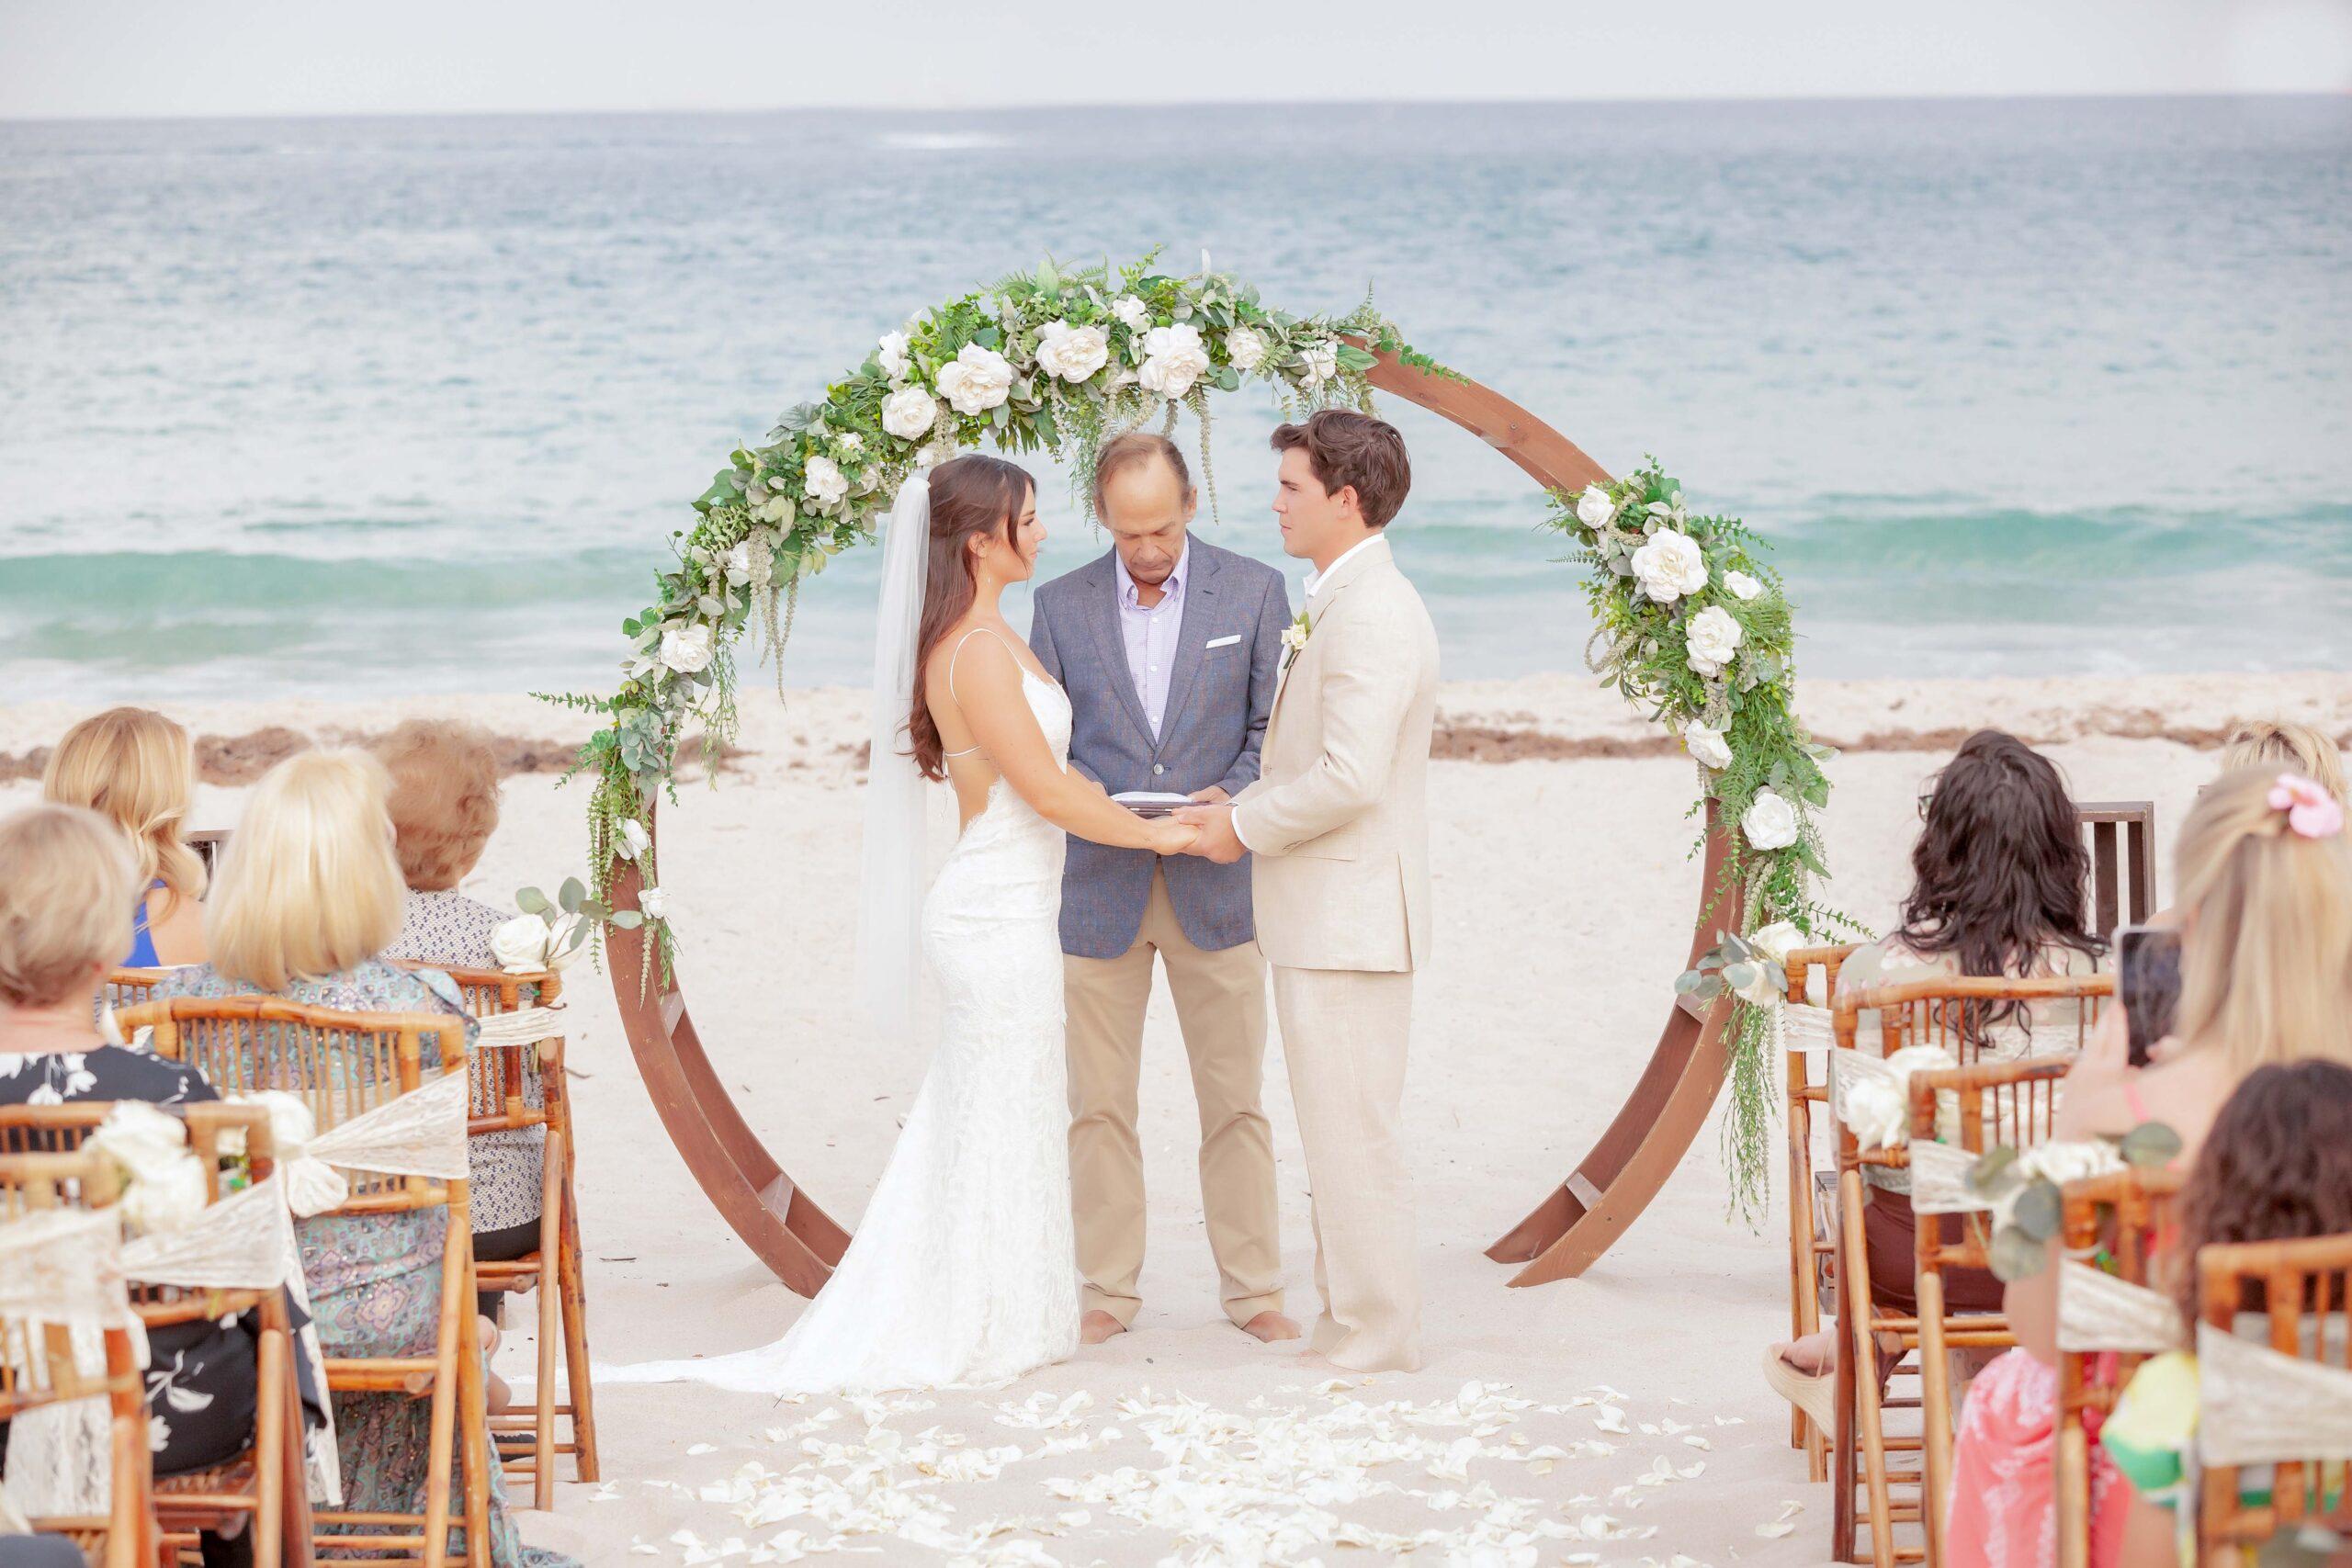 Affordable Fort Lauderdale Beach Reception - With Circular Arch